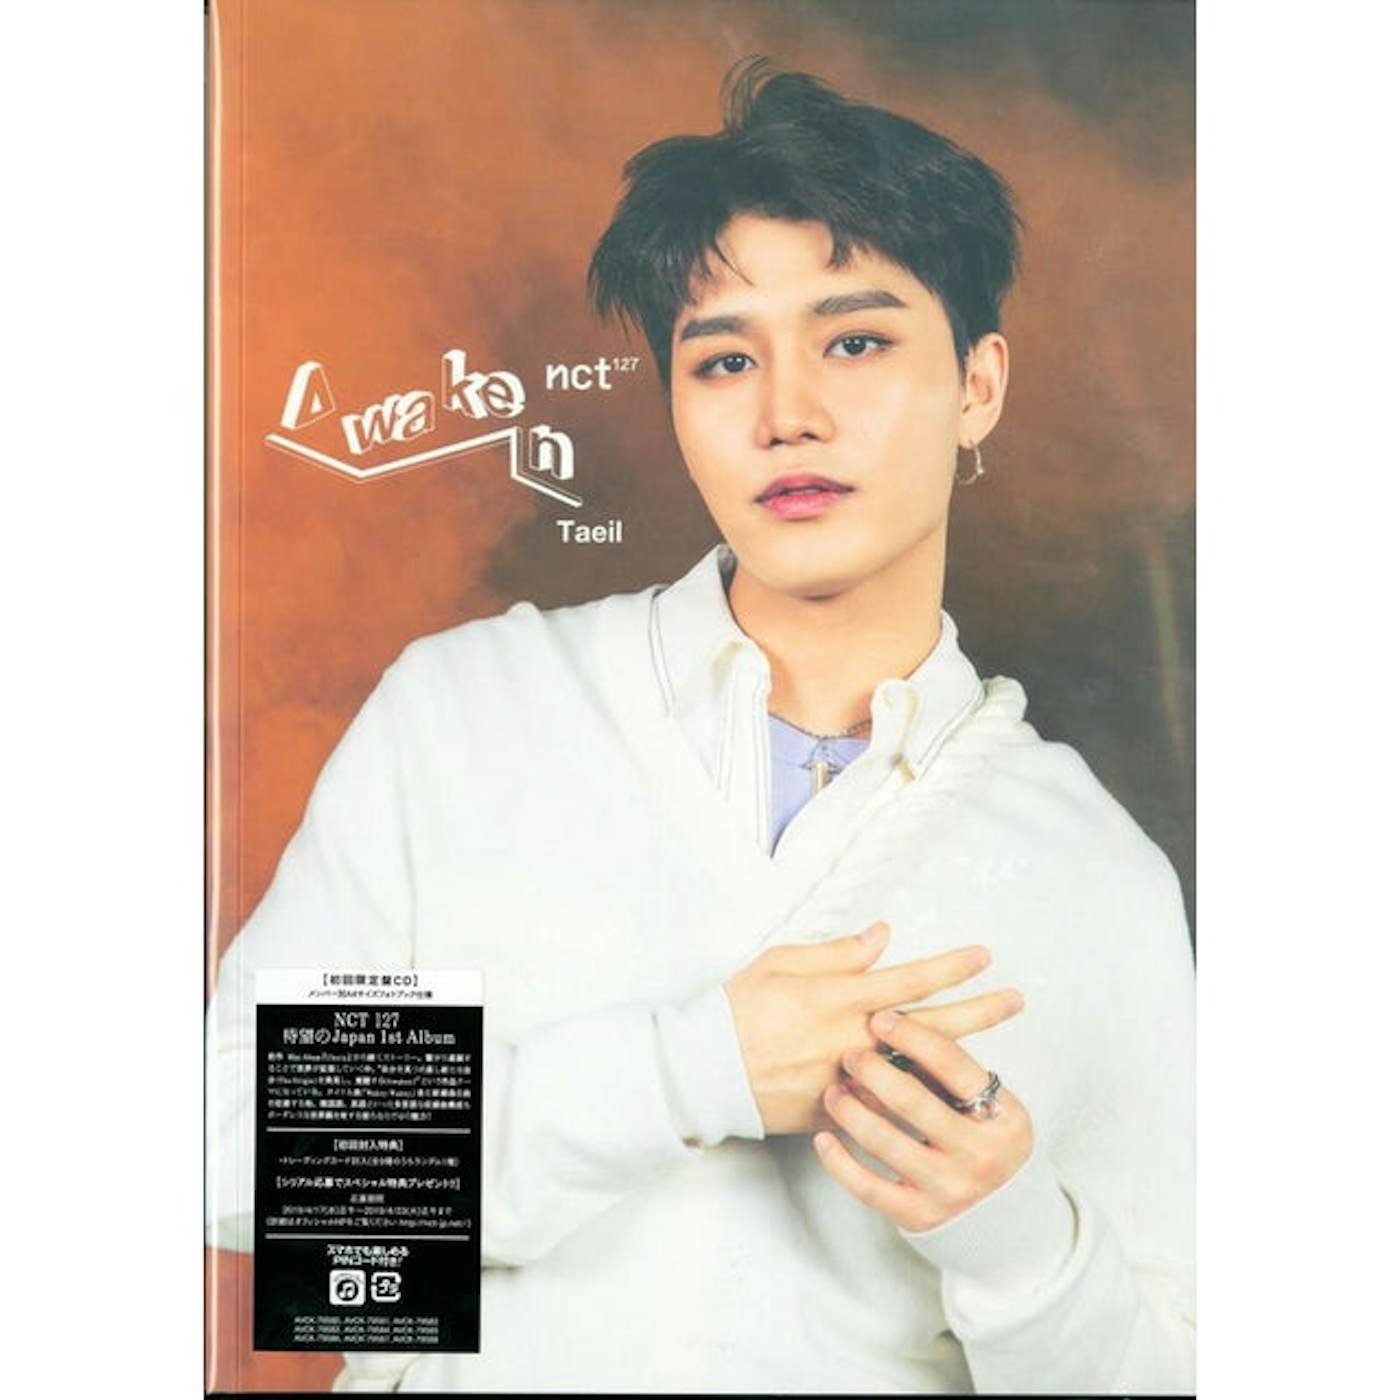 NCT 127 LOVEHOLIC: TAEIL VER. (LIMITED/TRADING CARD TYPE B) CD